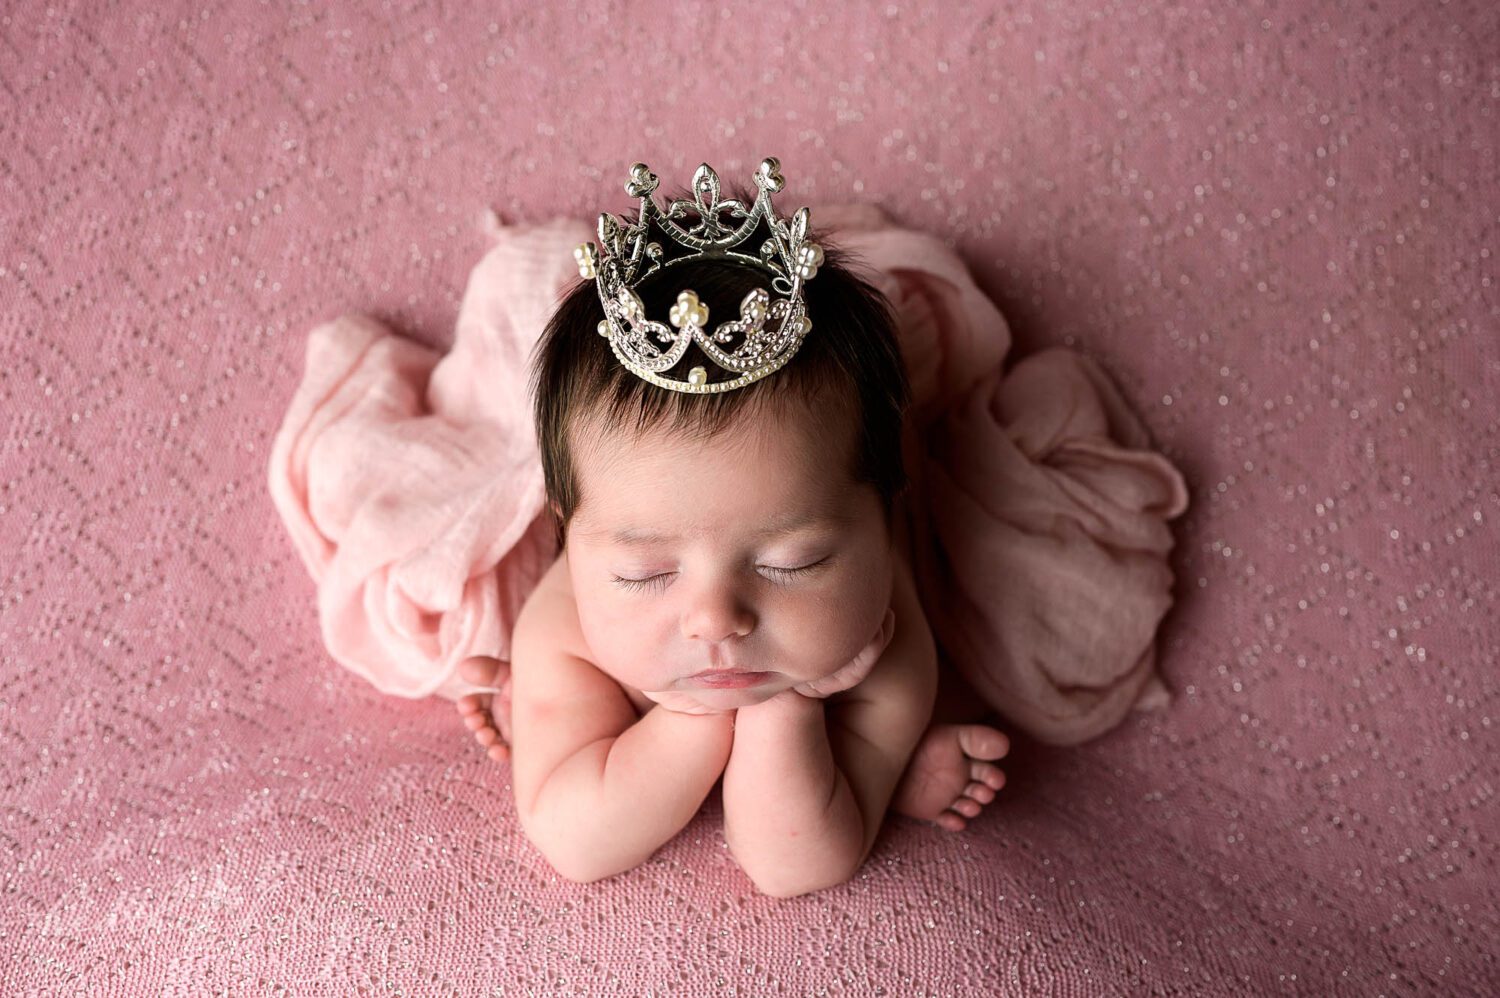 a newborn girl wears a crown and has a pink wrap draped over her. She is wearing a crown and in a froggy pose. 

newborn photos in newtown